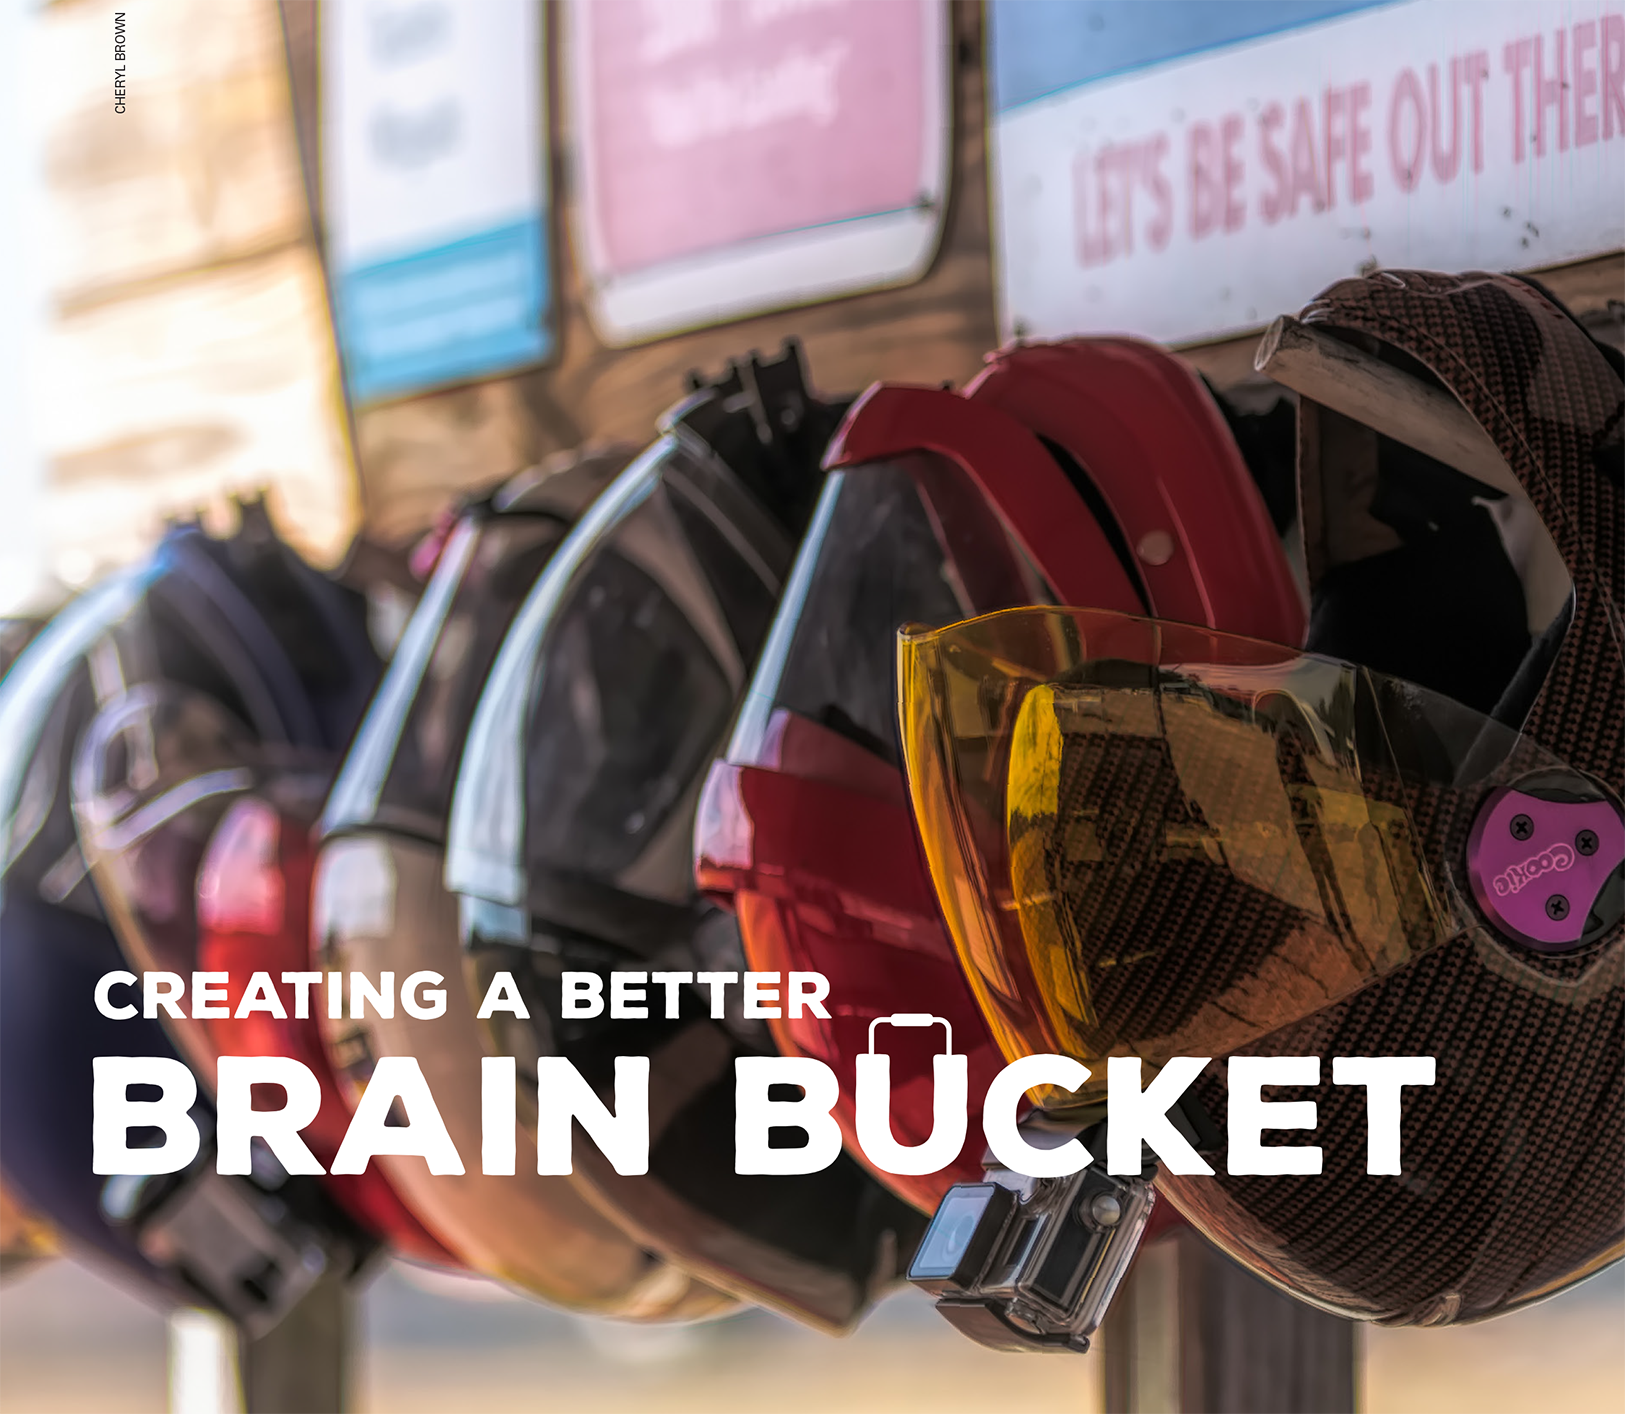 Creating a Better Brain Bucket—Skydiving Helmets Step Toward Safety Standards